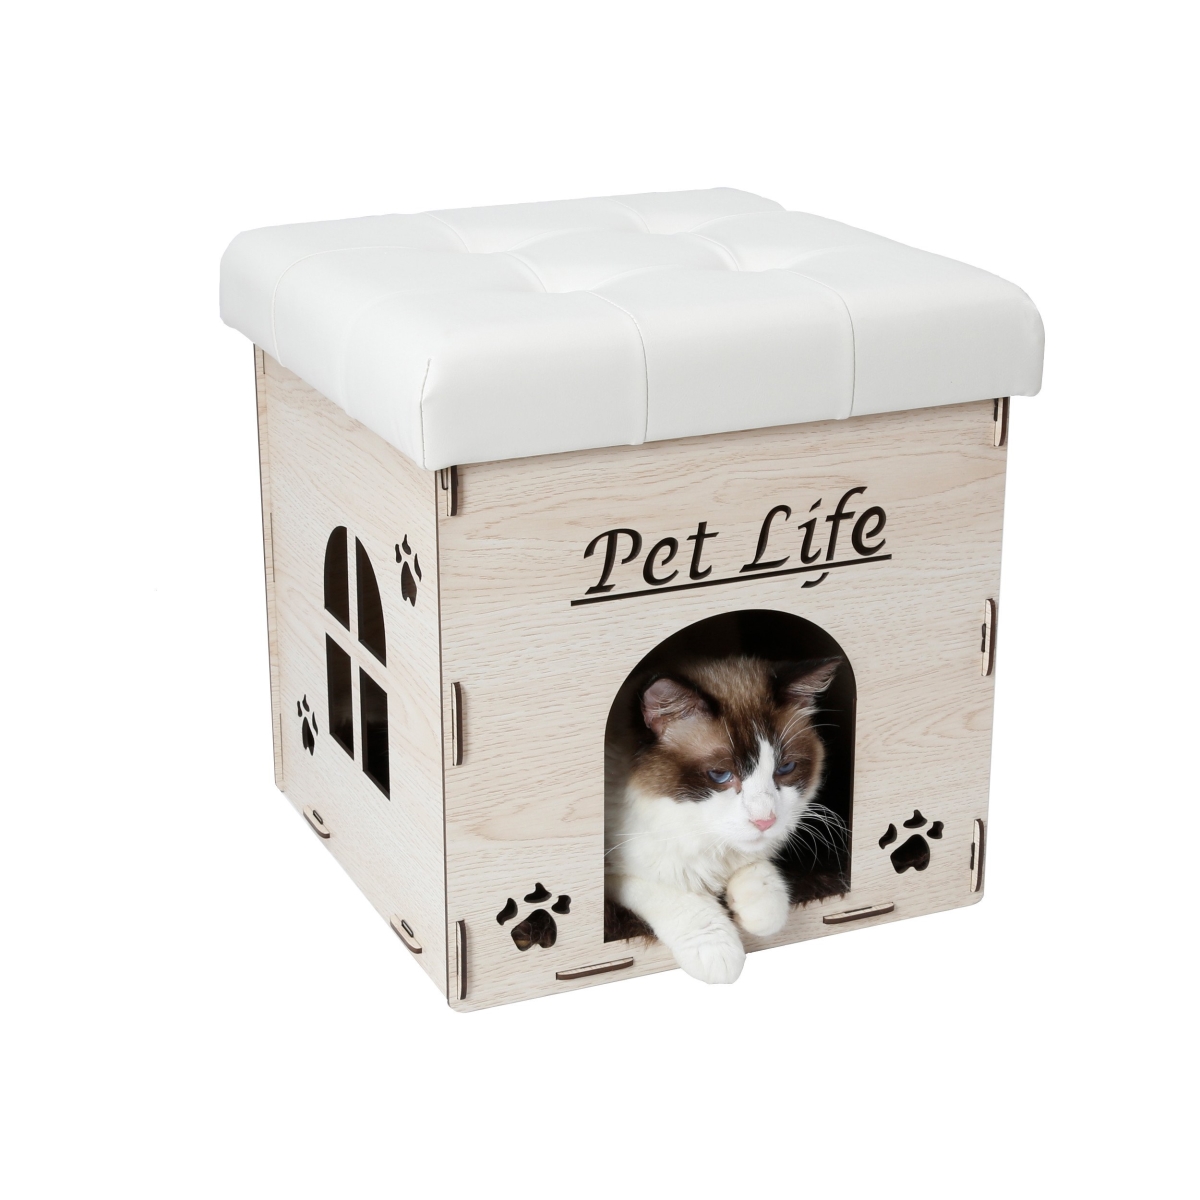 Pet Life Fn1whmd Foldaway Collapsible Designer Cat House Furniture Bench, White - One Size